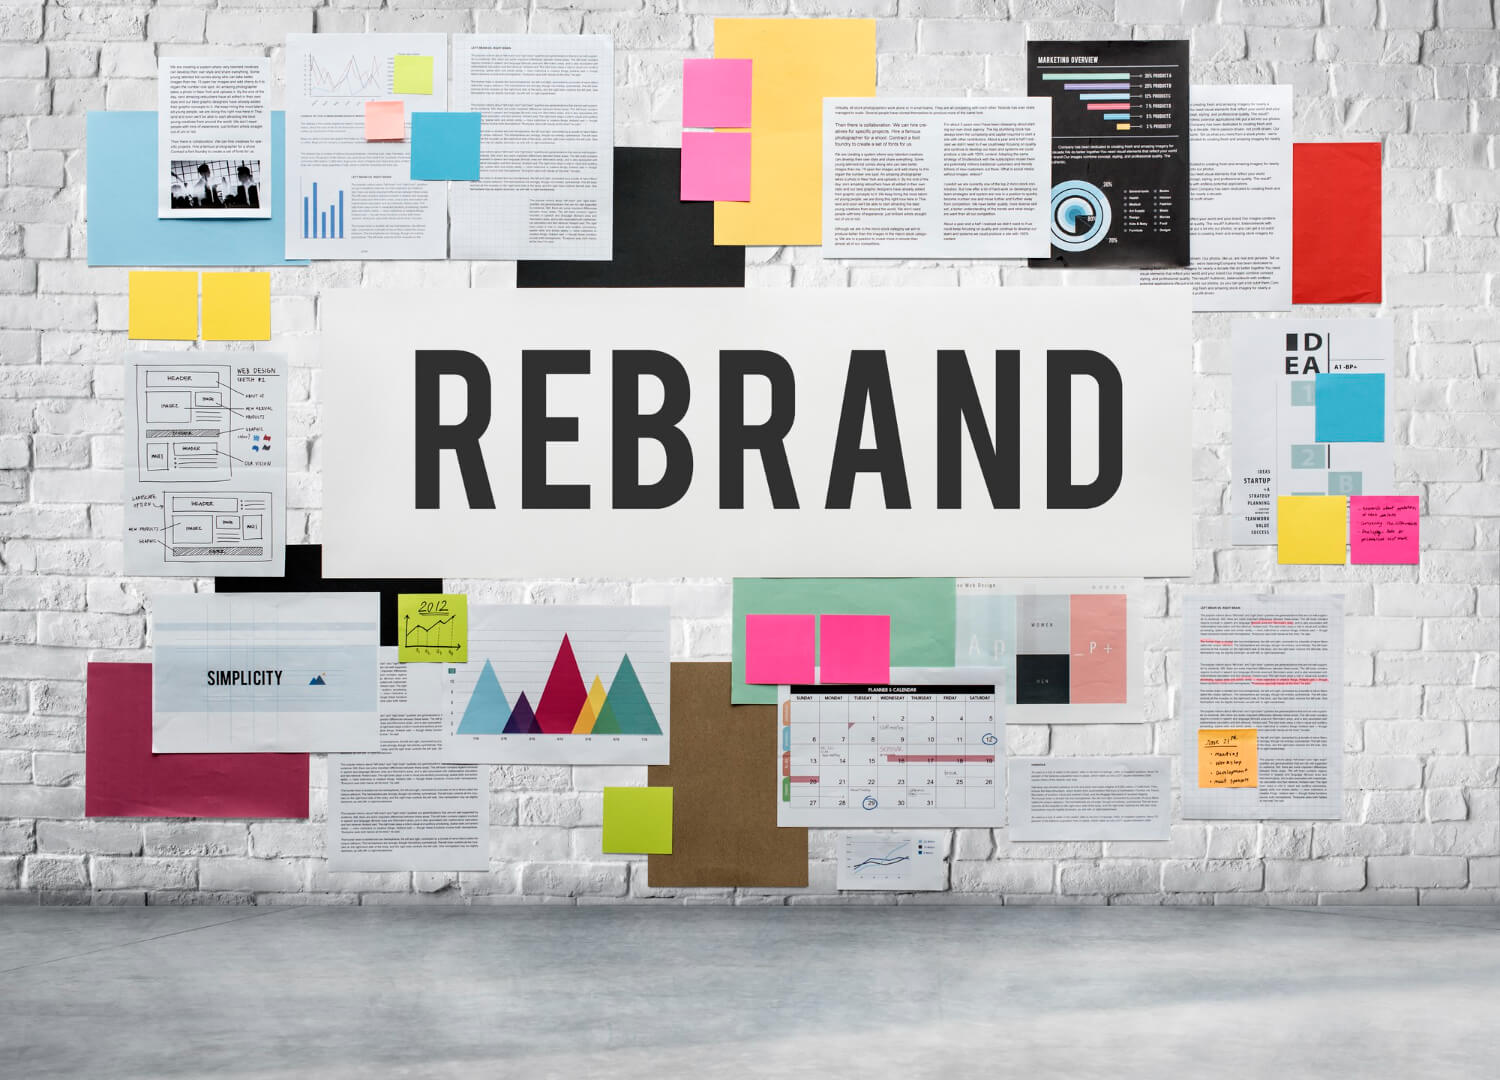 Rebrand written boldly on a wall